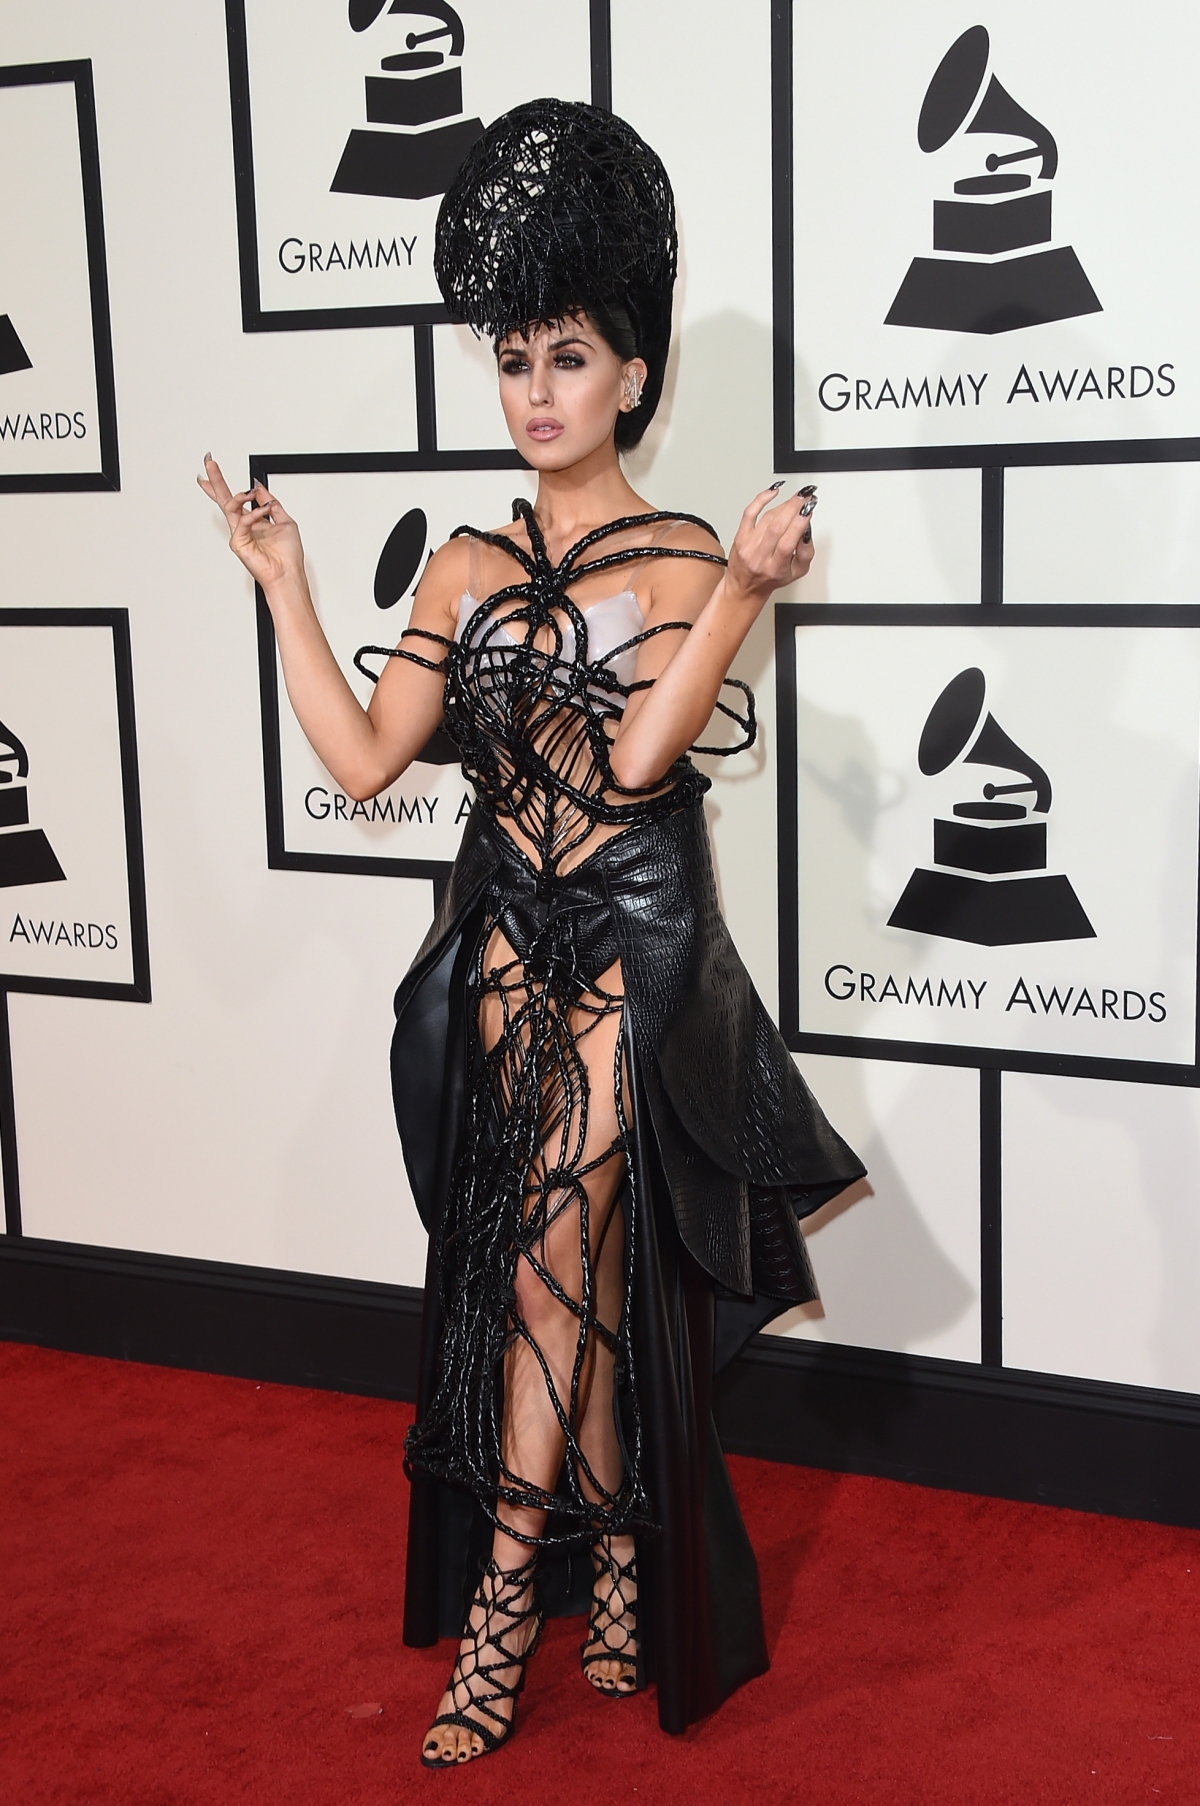 Grammys 2016 The most bizarre dresses on the red carpet